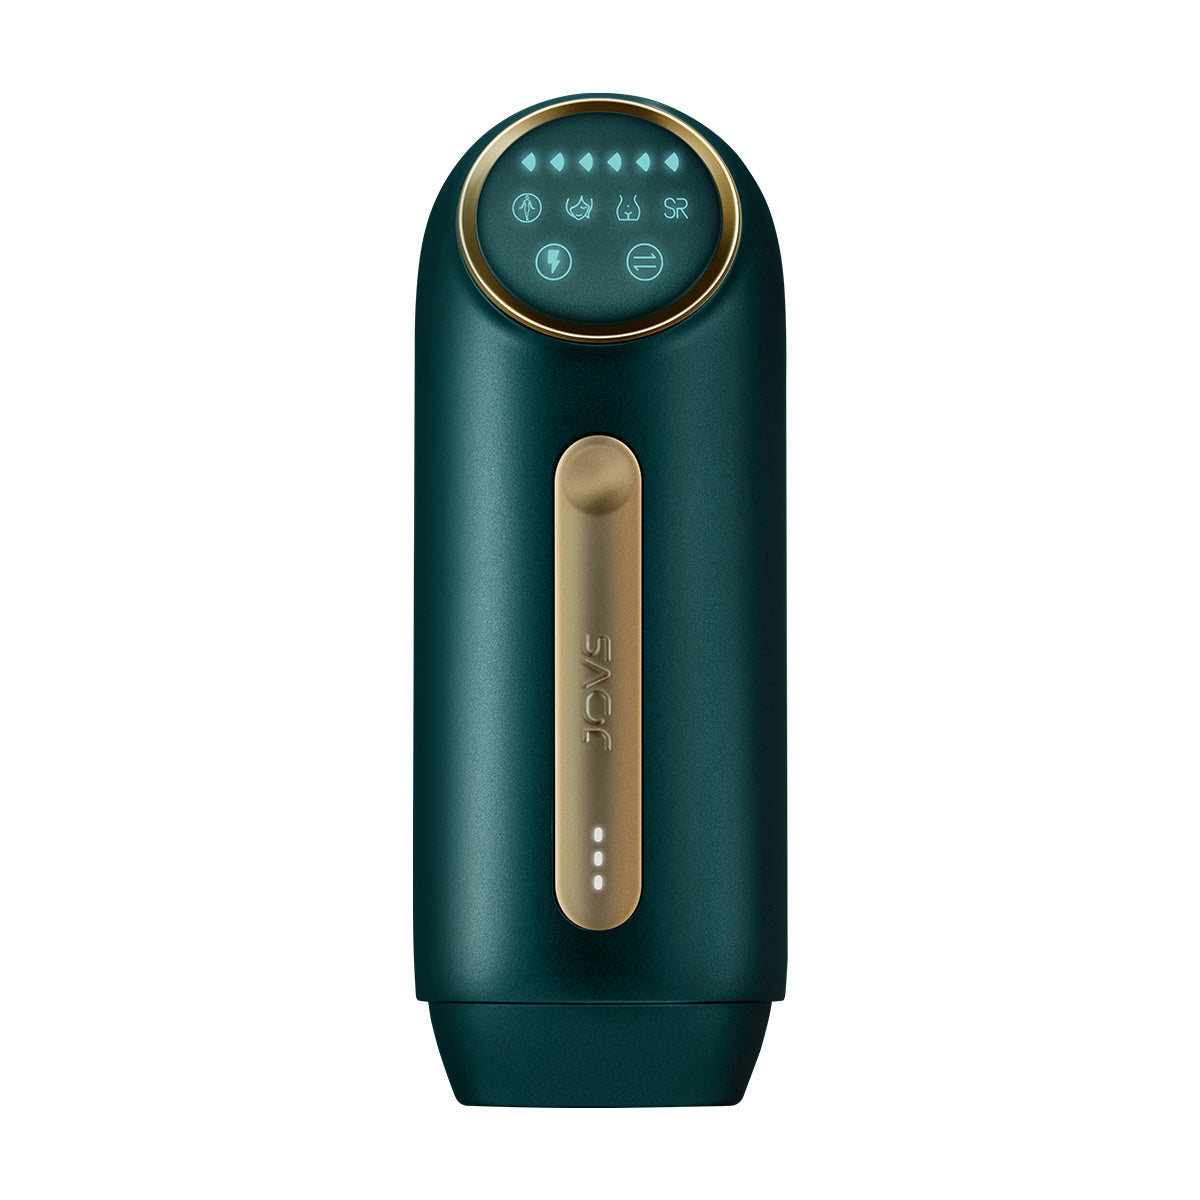 Compact and modern JOVS Mini IPL Hair Removal Device in an elegant green and gold color scheme with a user-friendly touch interface.